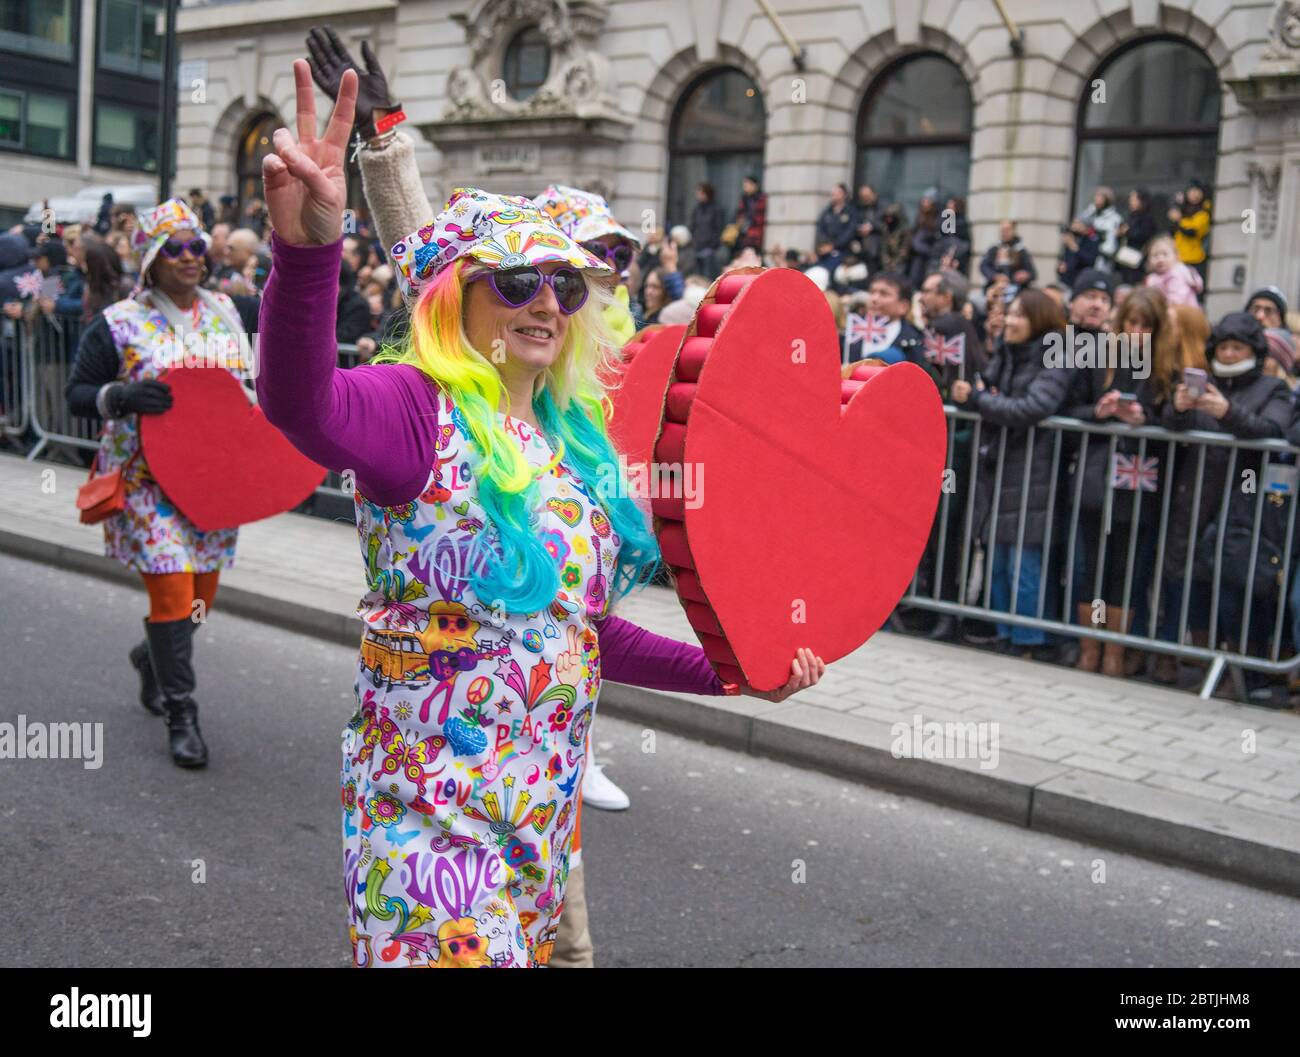 London New Years Day Parade 2020. Lady with rainbow hair holding a big red heart. Stock Photo